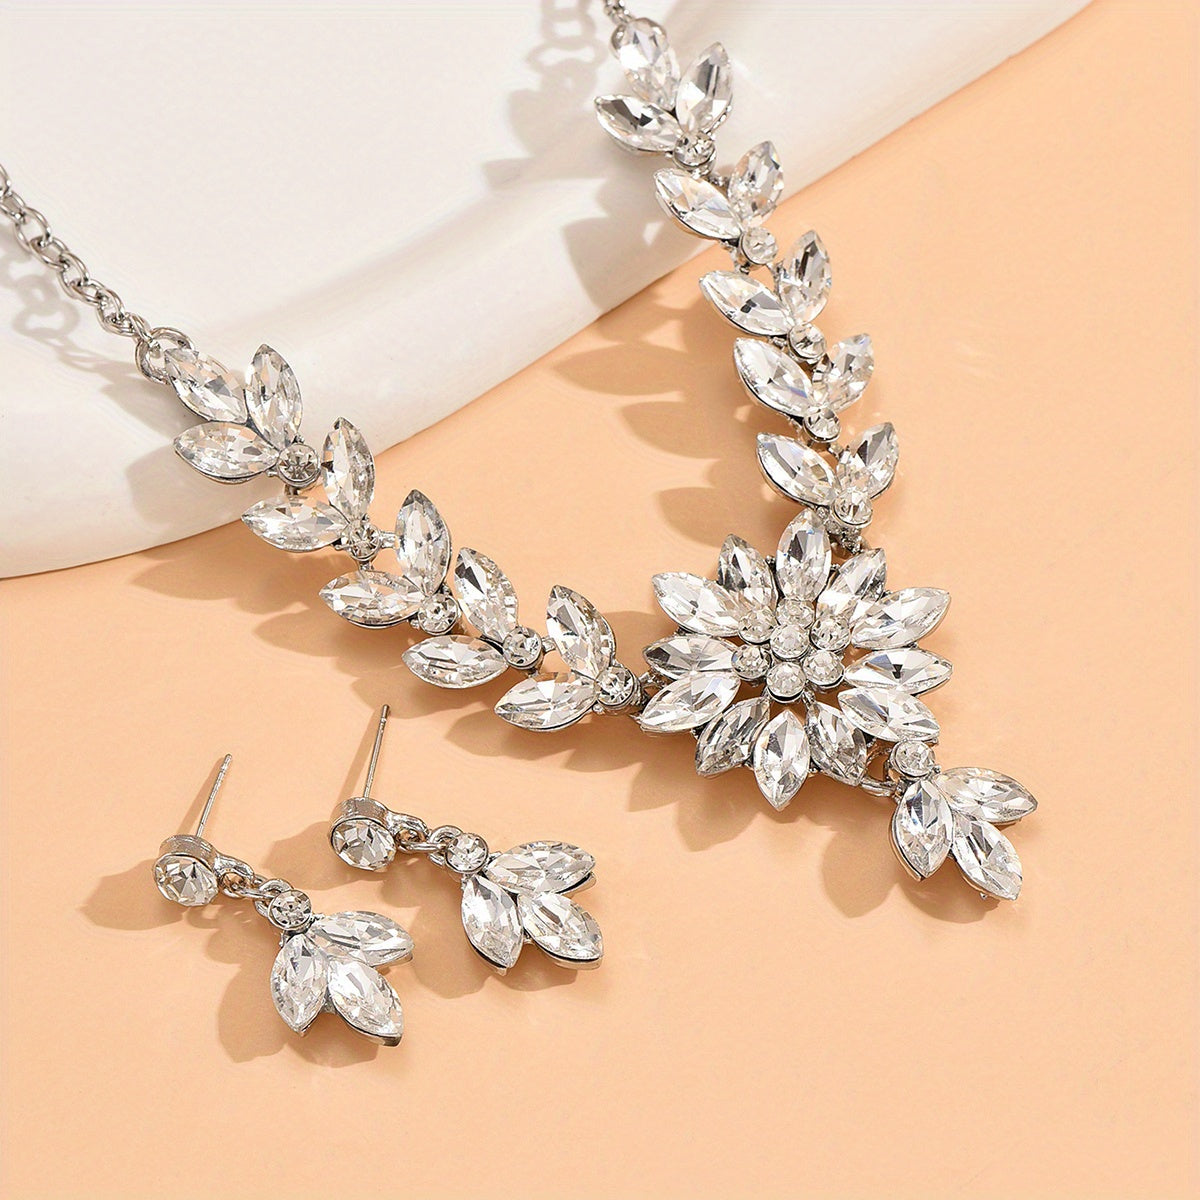 Flower Shape Crystal Jewelry Set With Pendant Necklace & Dangle Earrings Set Gifts Fit With Wedding Dress